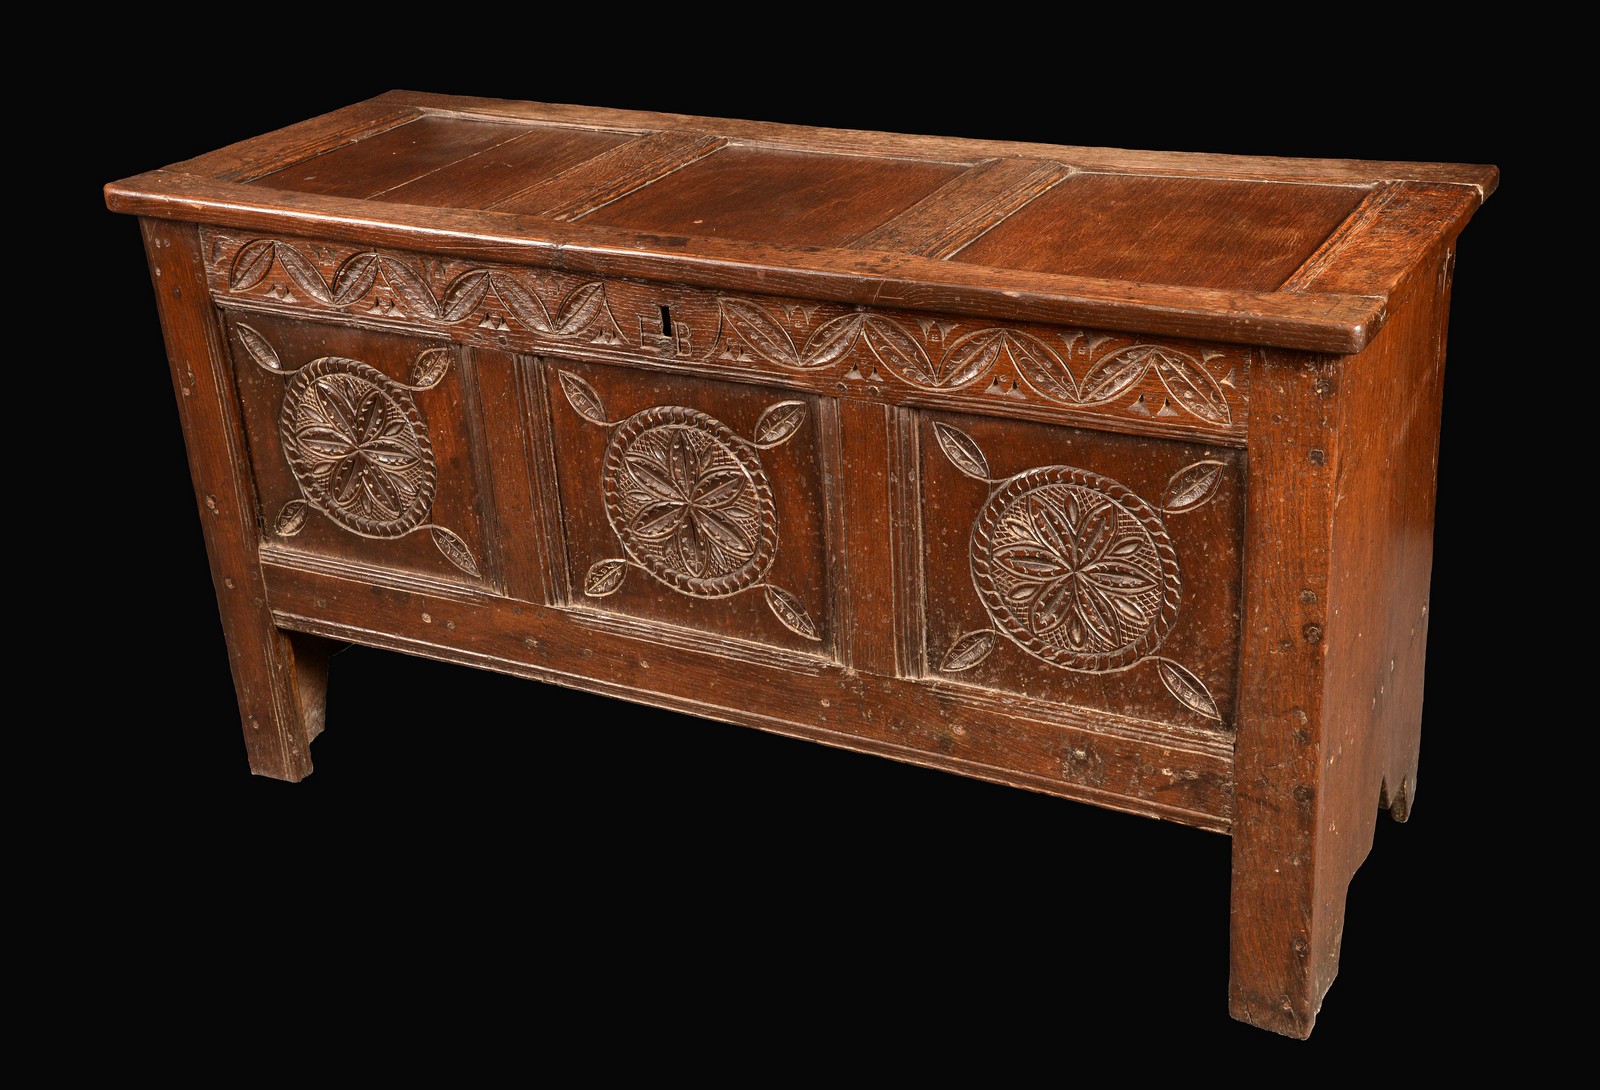 An 18th century oak blanket box, three panel top carved with initials E.B, stile feet, c.1720.